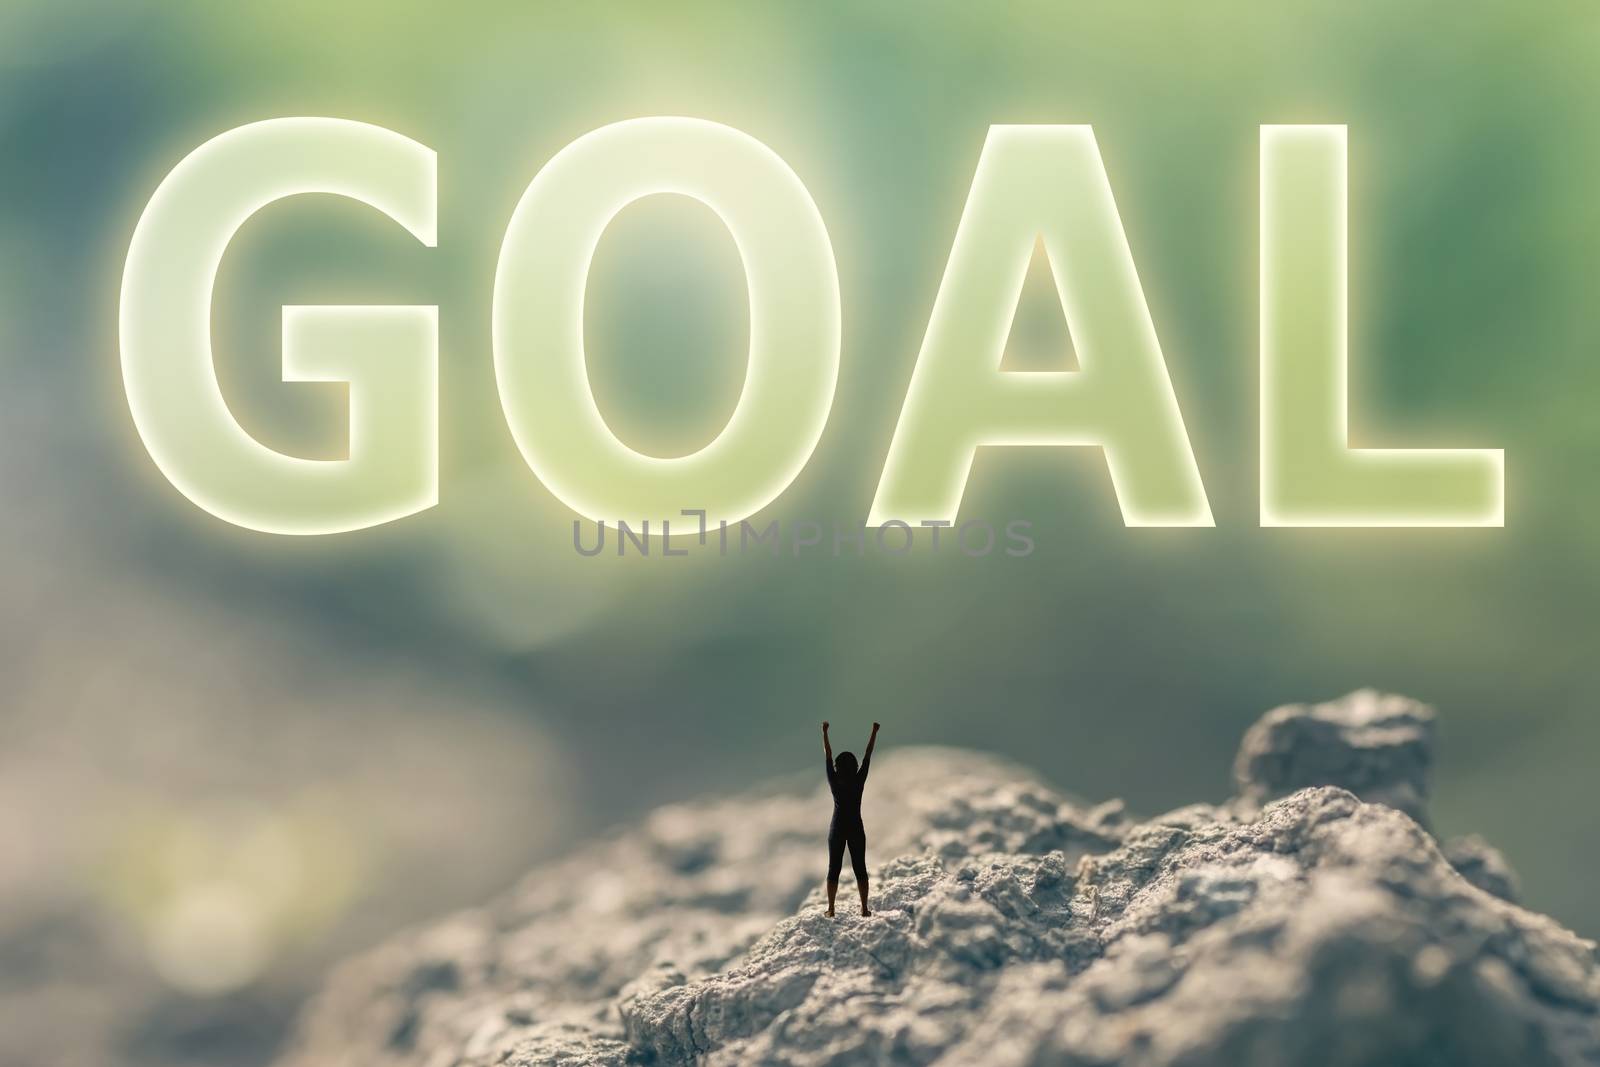 Concept of goal with a person stand in the outdoor and looking up the text over the sky in nature background.